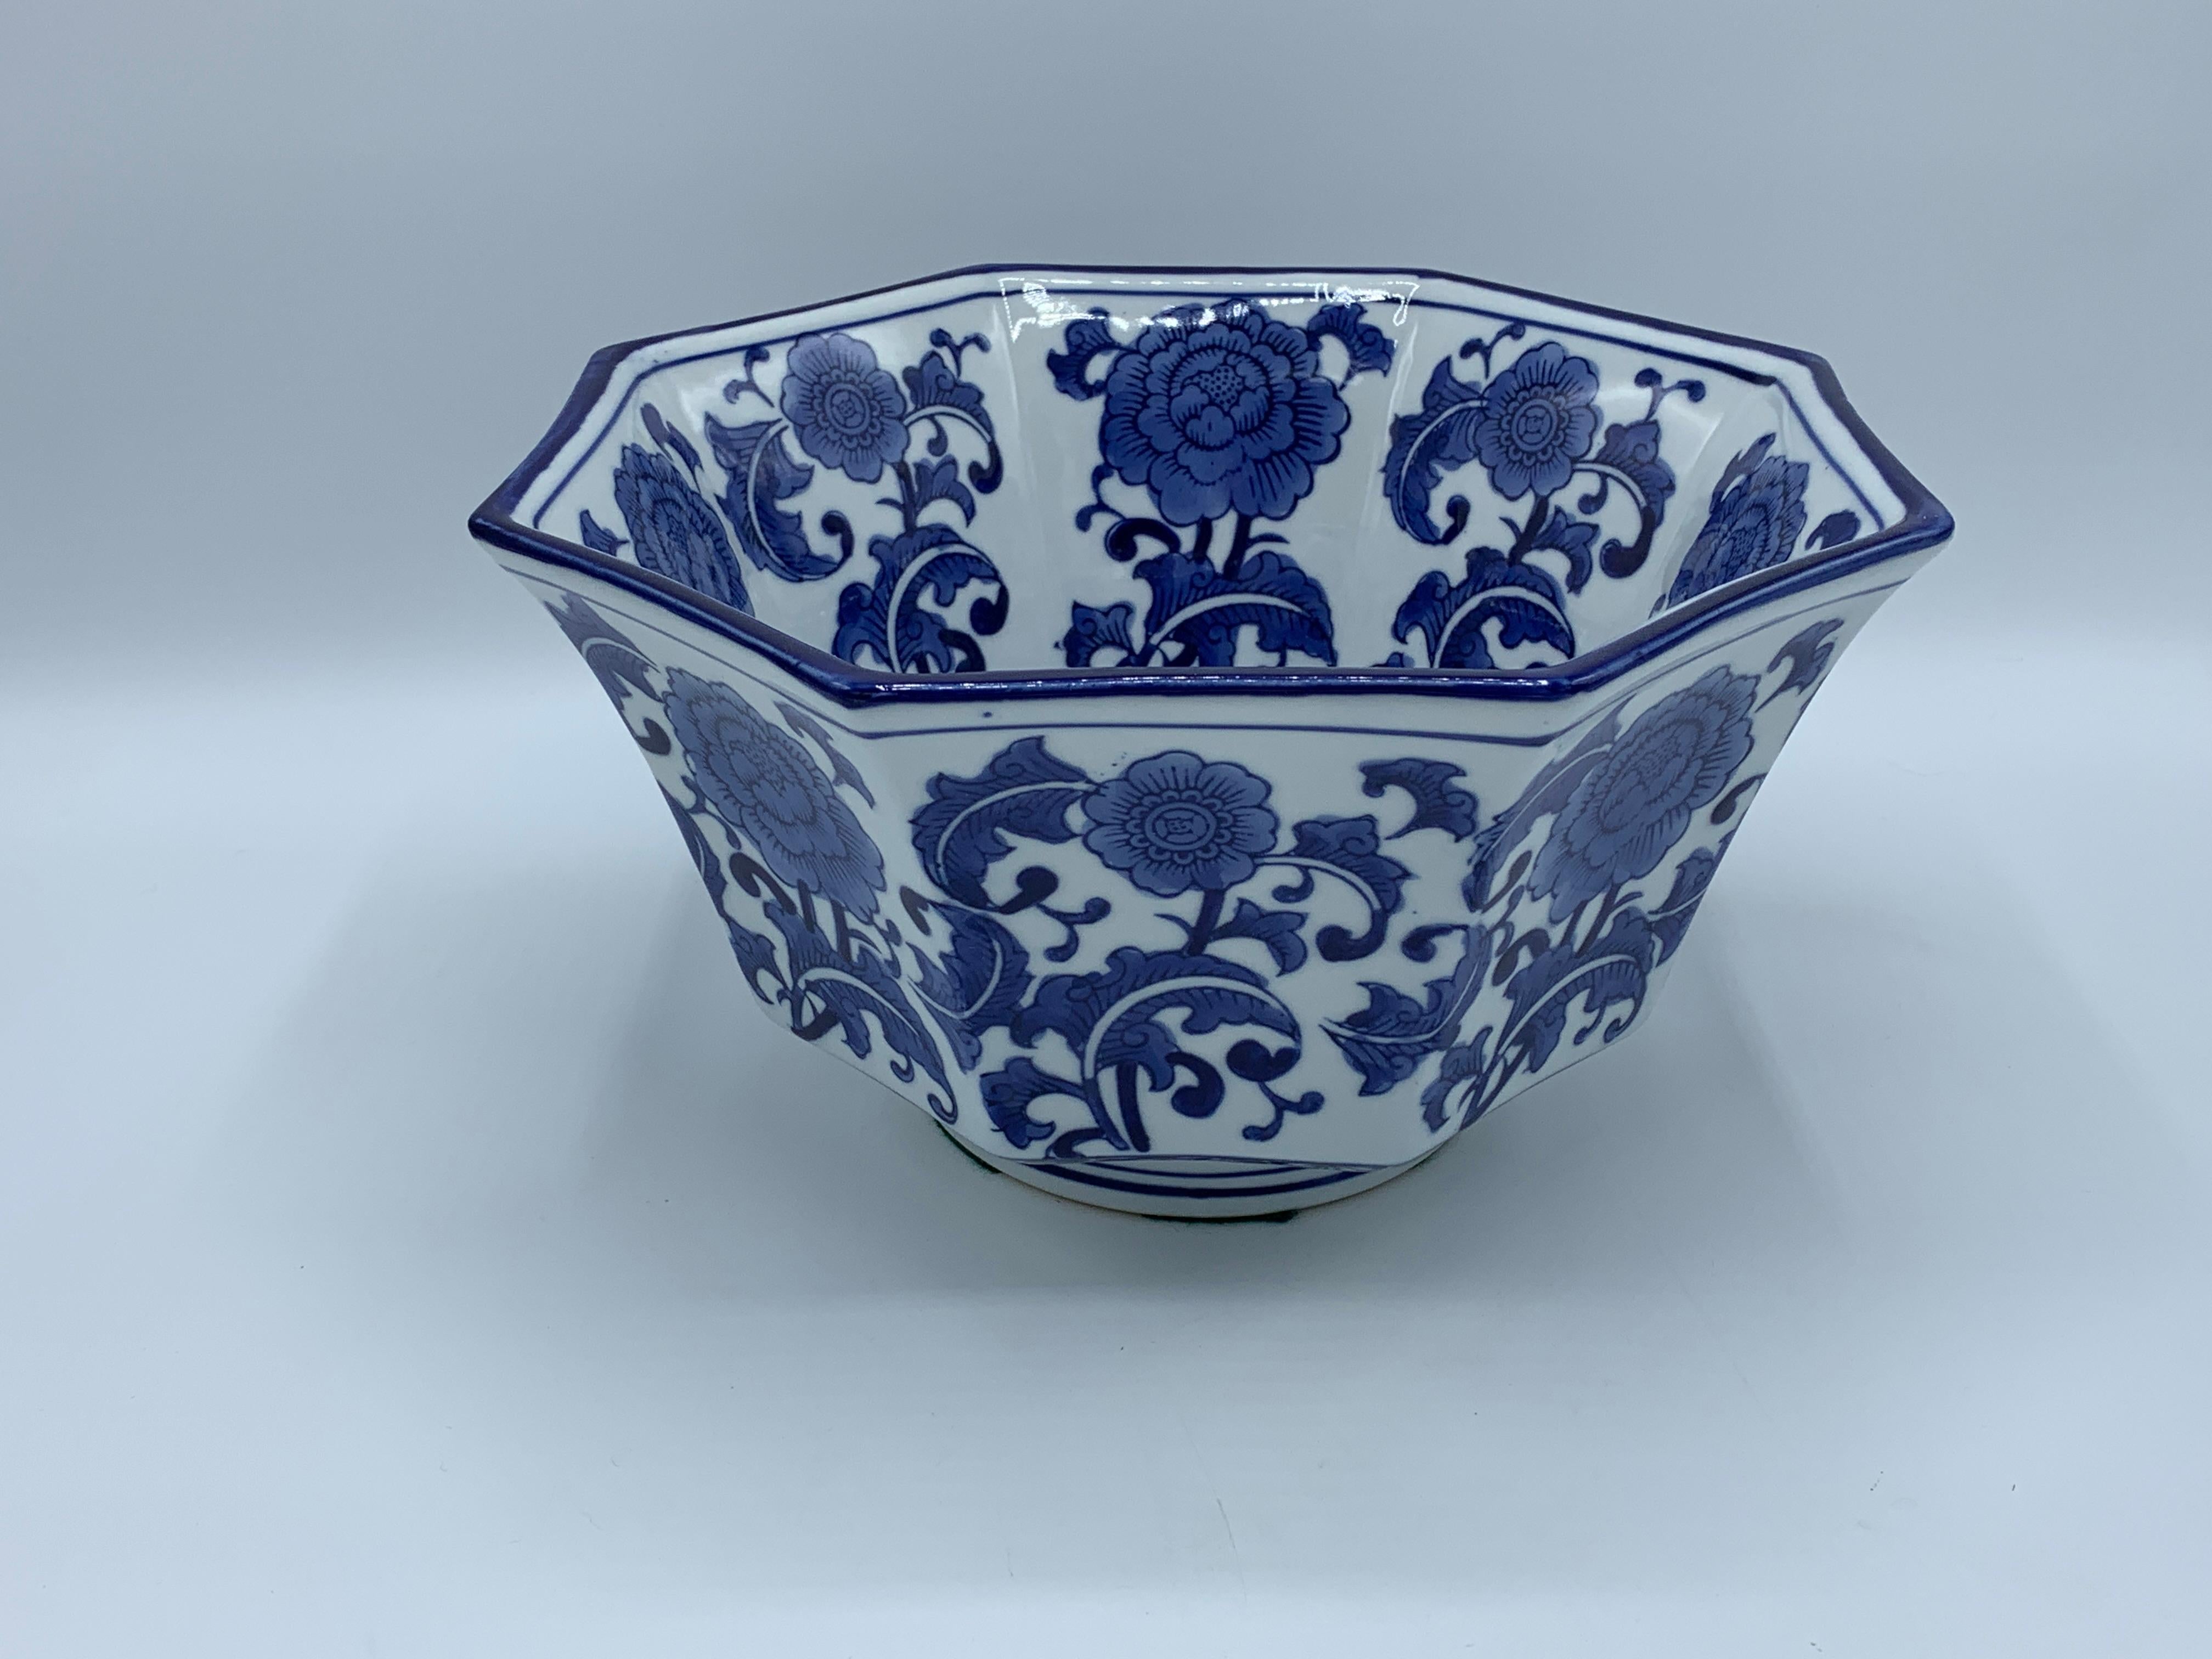 Listed is a gorgeous, 1980s blue and white porcelain bowl with a Chinoiserie peony and floral scroll motif. The bowl measures 10.5